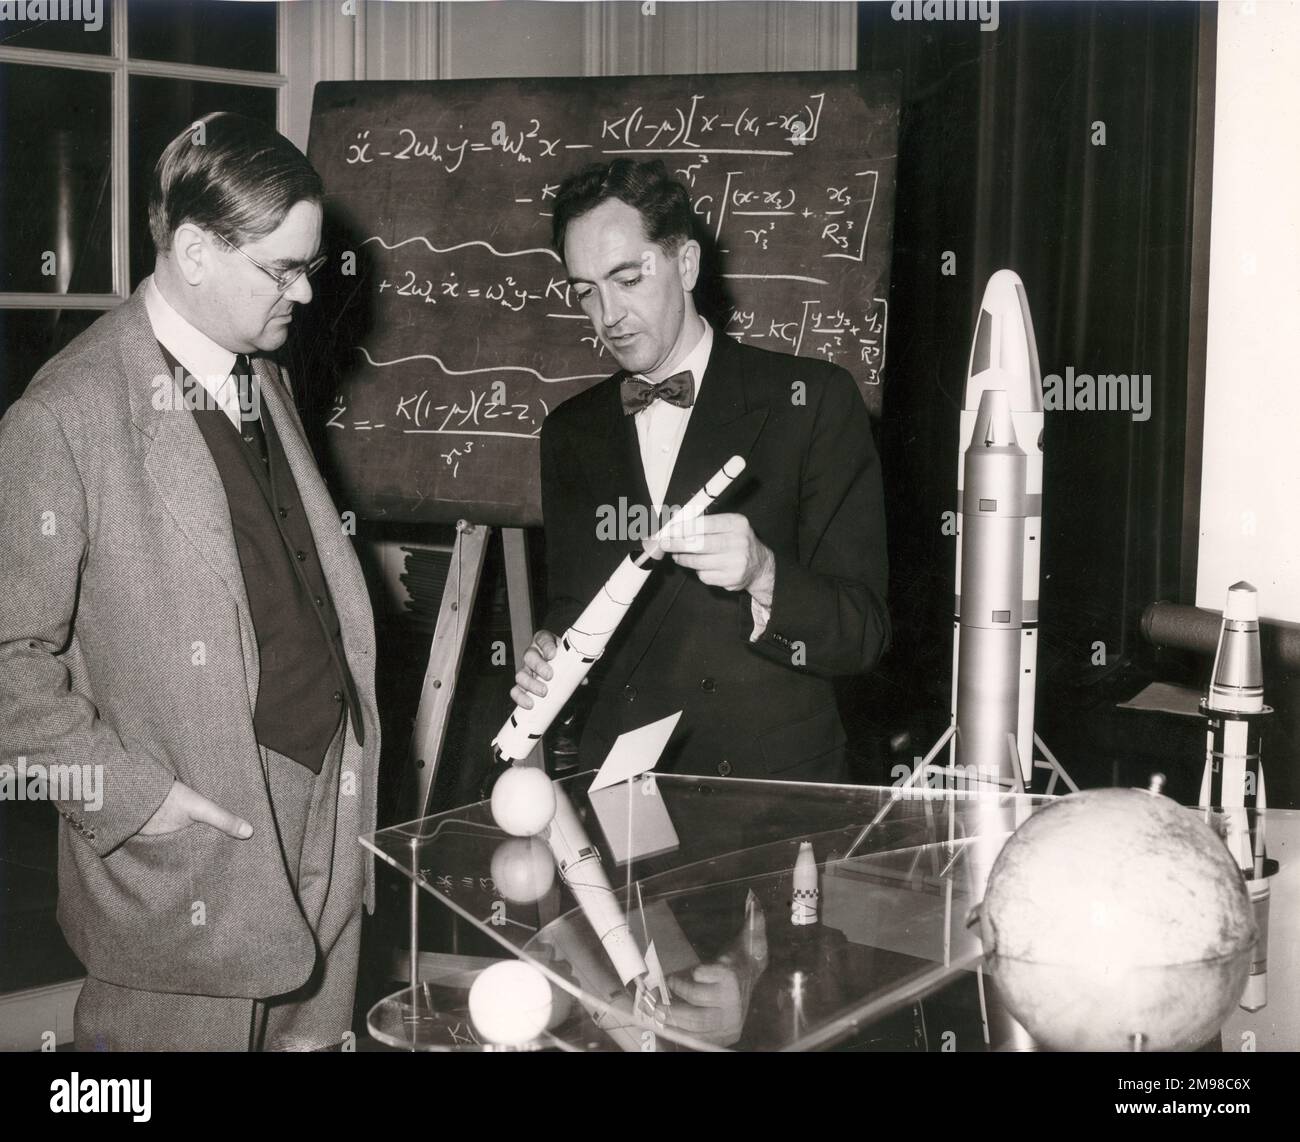 John Allen, right, of the Avro Weapons Research Division, discussed the extreme launch accuracies needed for lunar probes at a lecture to the Graduates and Students Section of the Royal Aeronautical Society at No.4 Hamilton Place on 7 October 1959. On the left is Charles H. Gibbs-Smith. Stock Photo